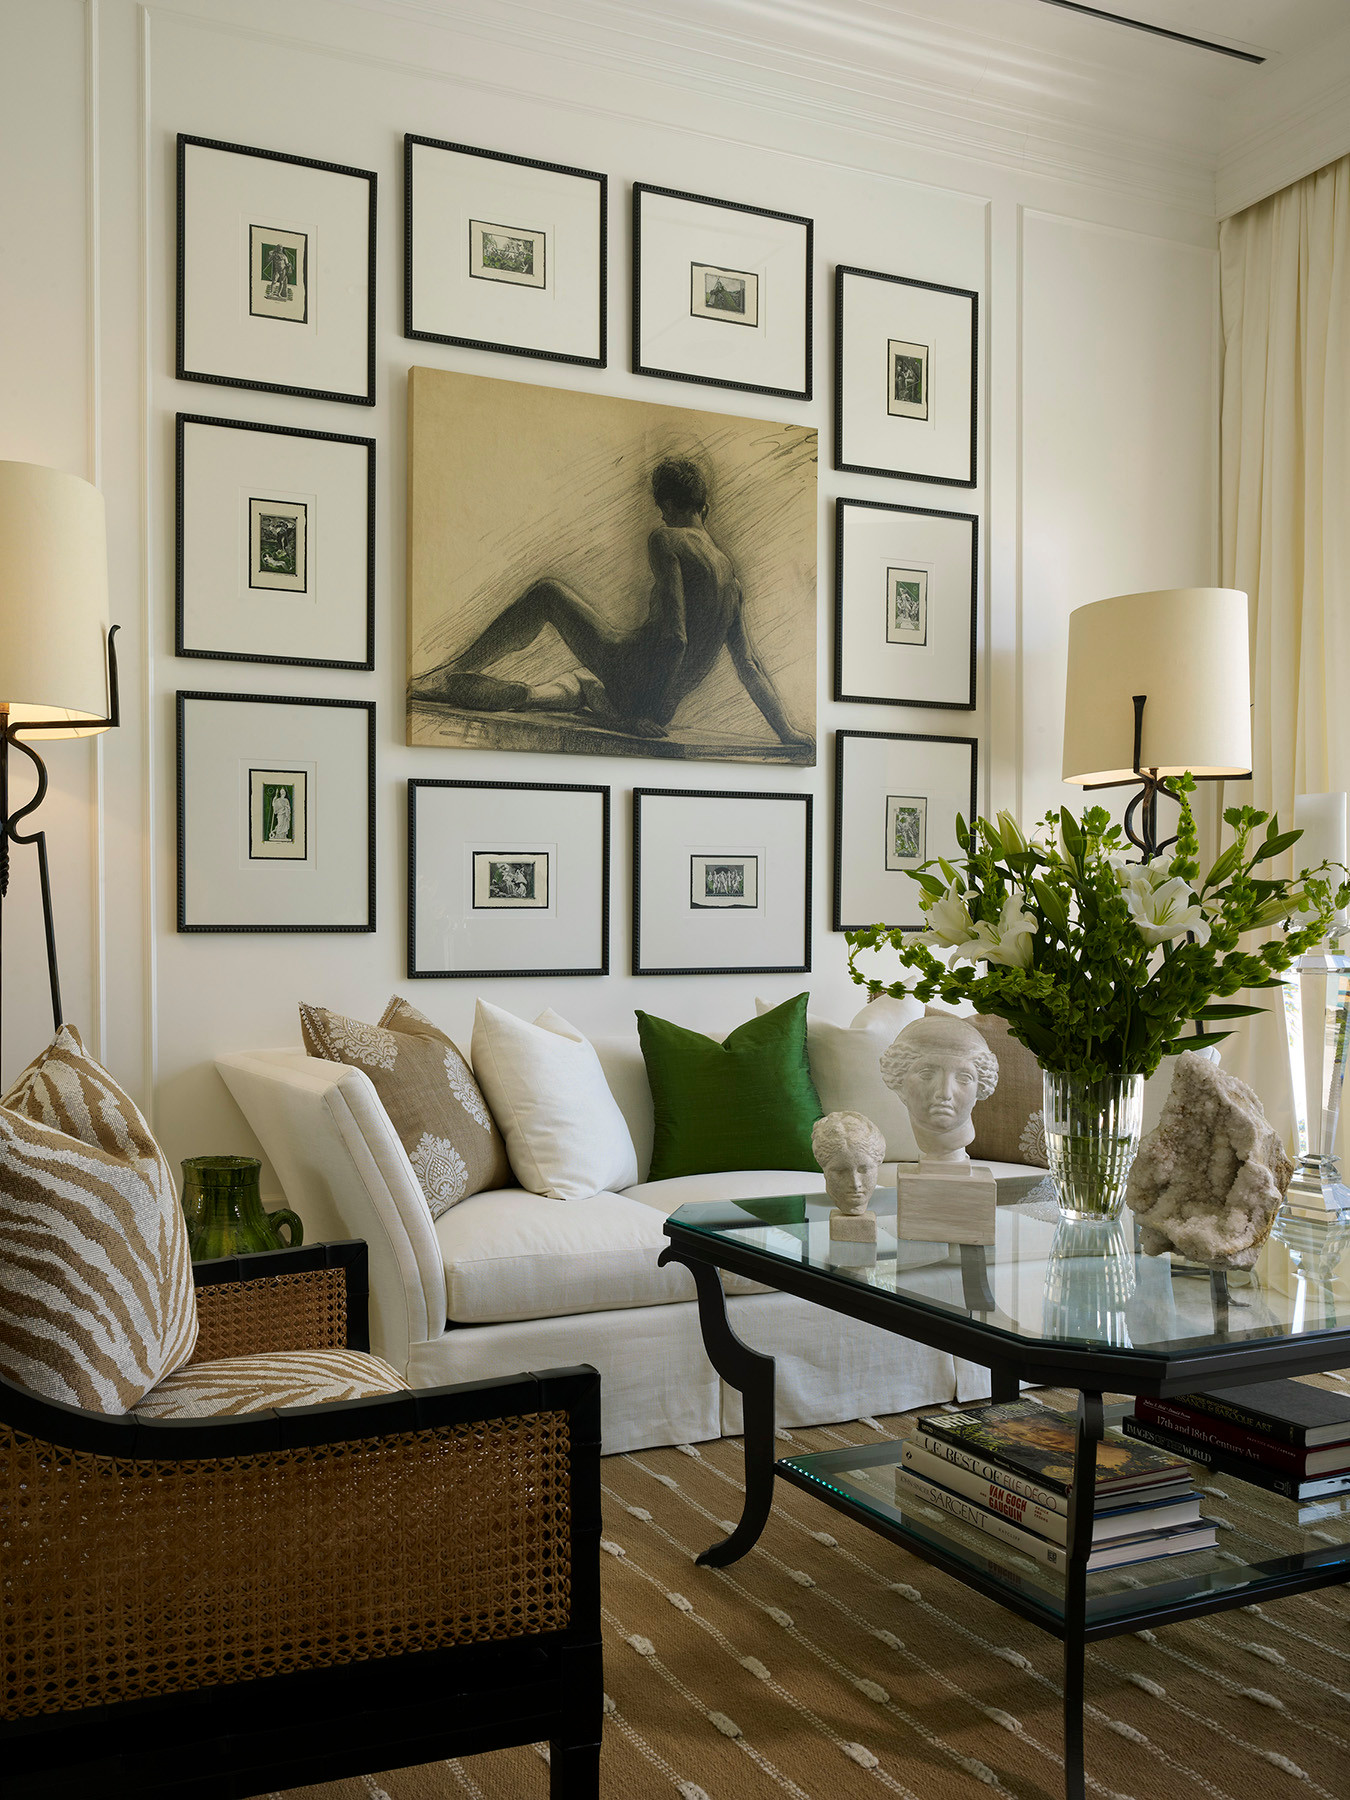 Nicely curated gallery wall  (from Houzz)